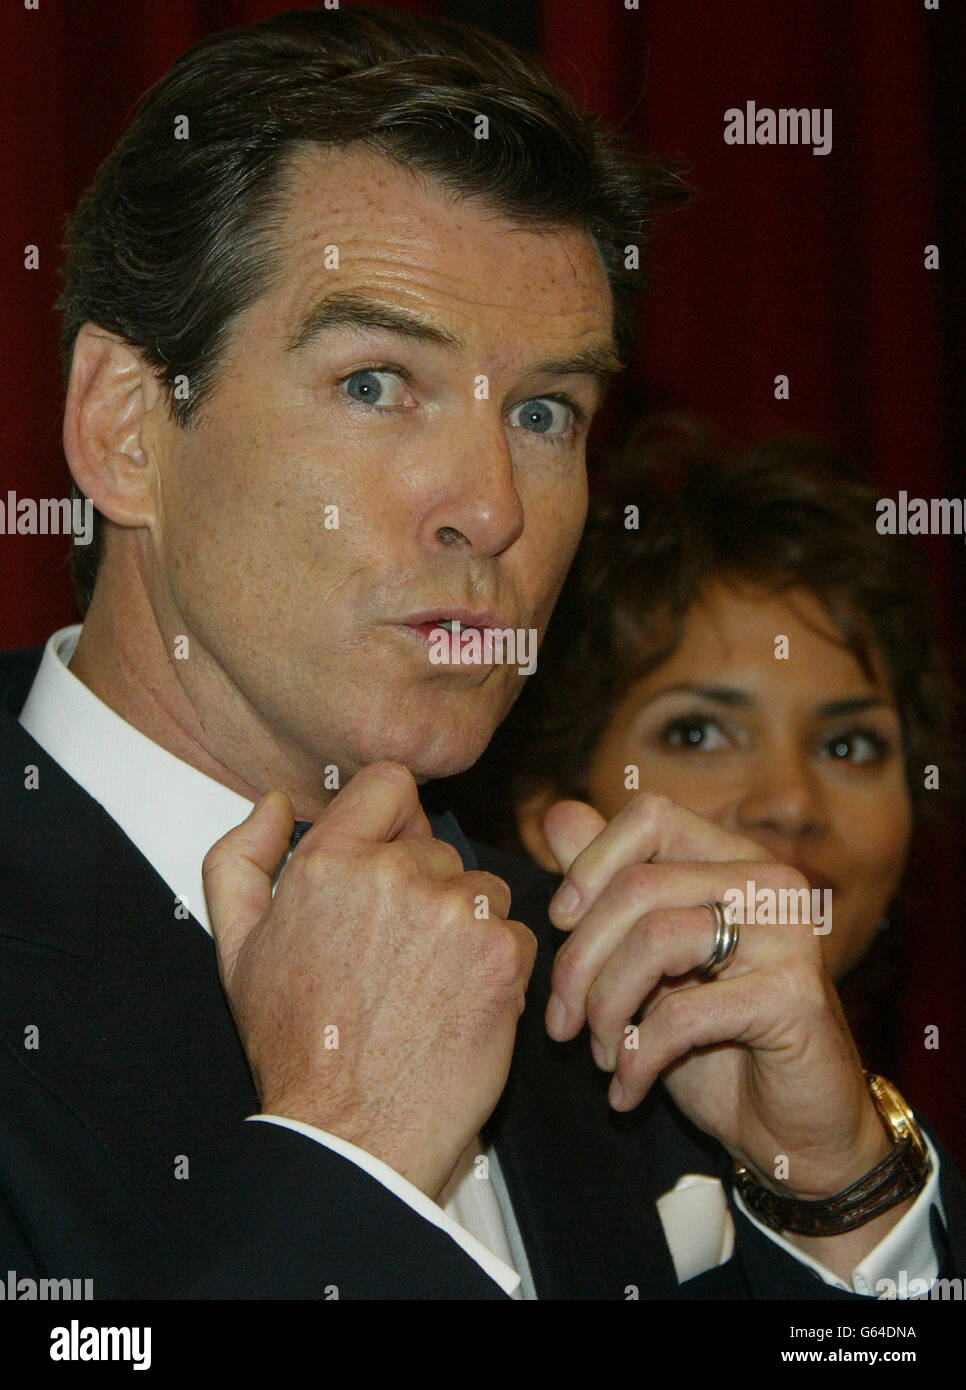 Pierce Brosnan and Halle Berry arrive for World Premiere of the new James Bond film 'Die Another Day' attended by Britain's Queen Elizabeth II, at the Royal Albert Hall. Stock Photo